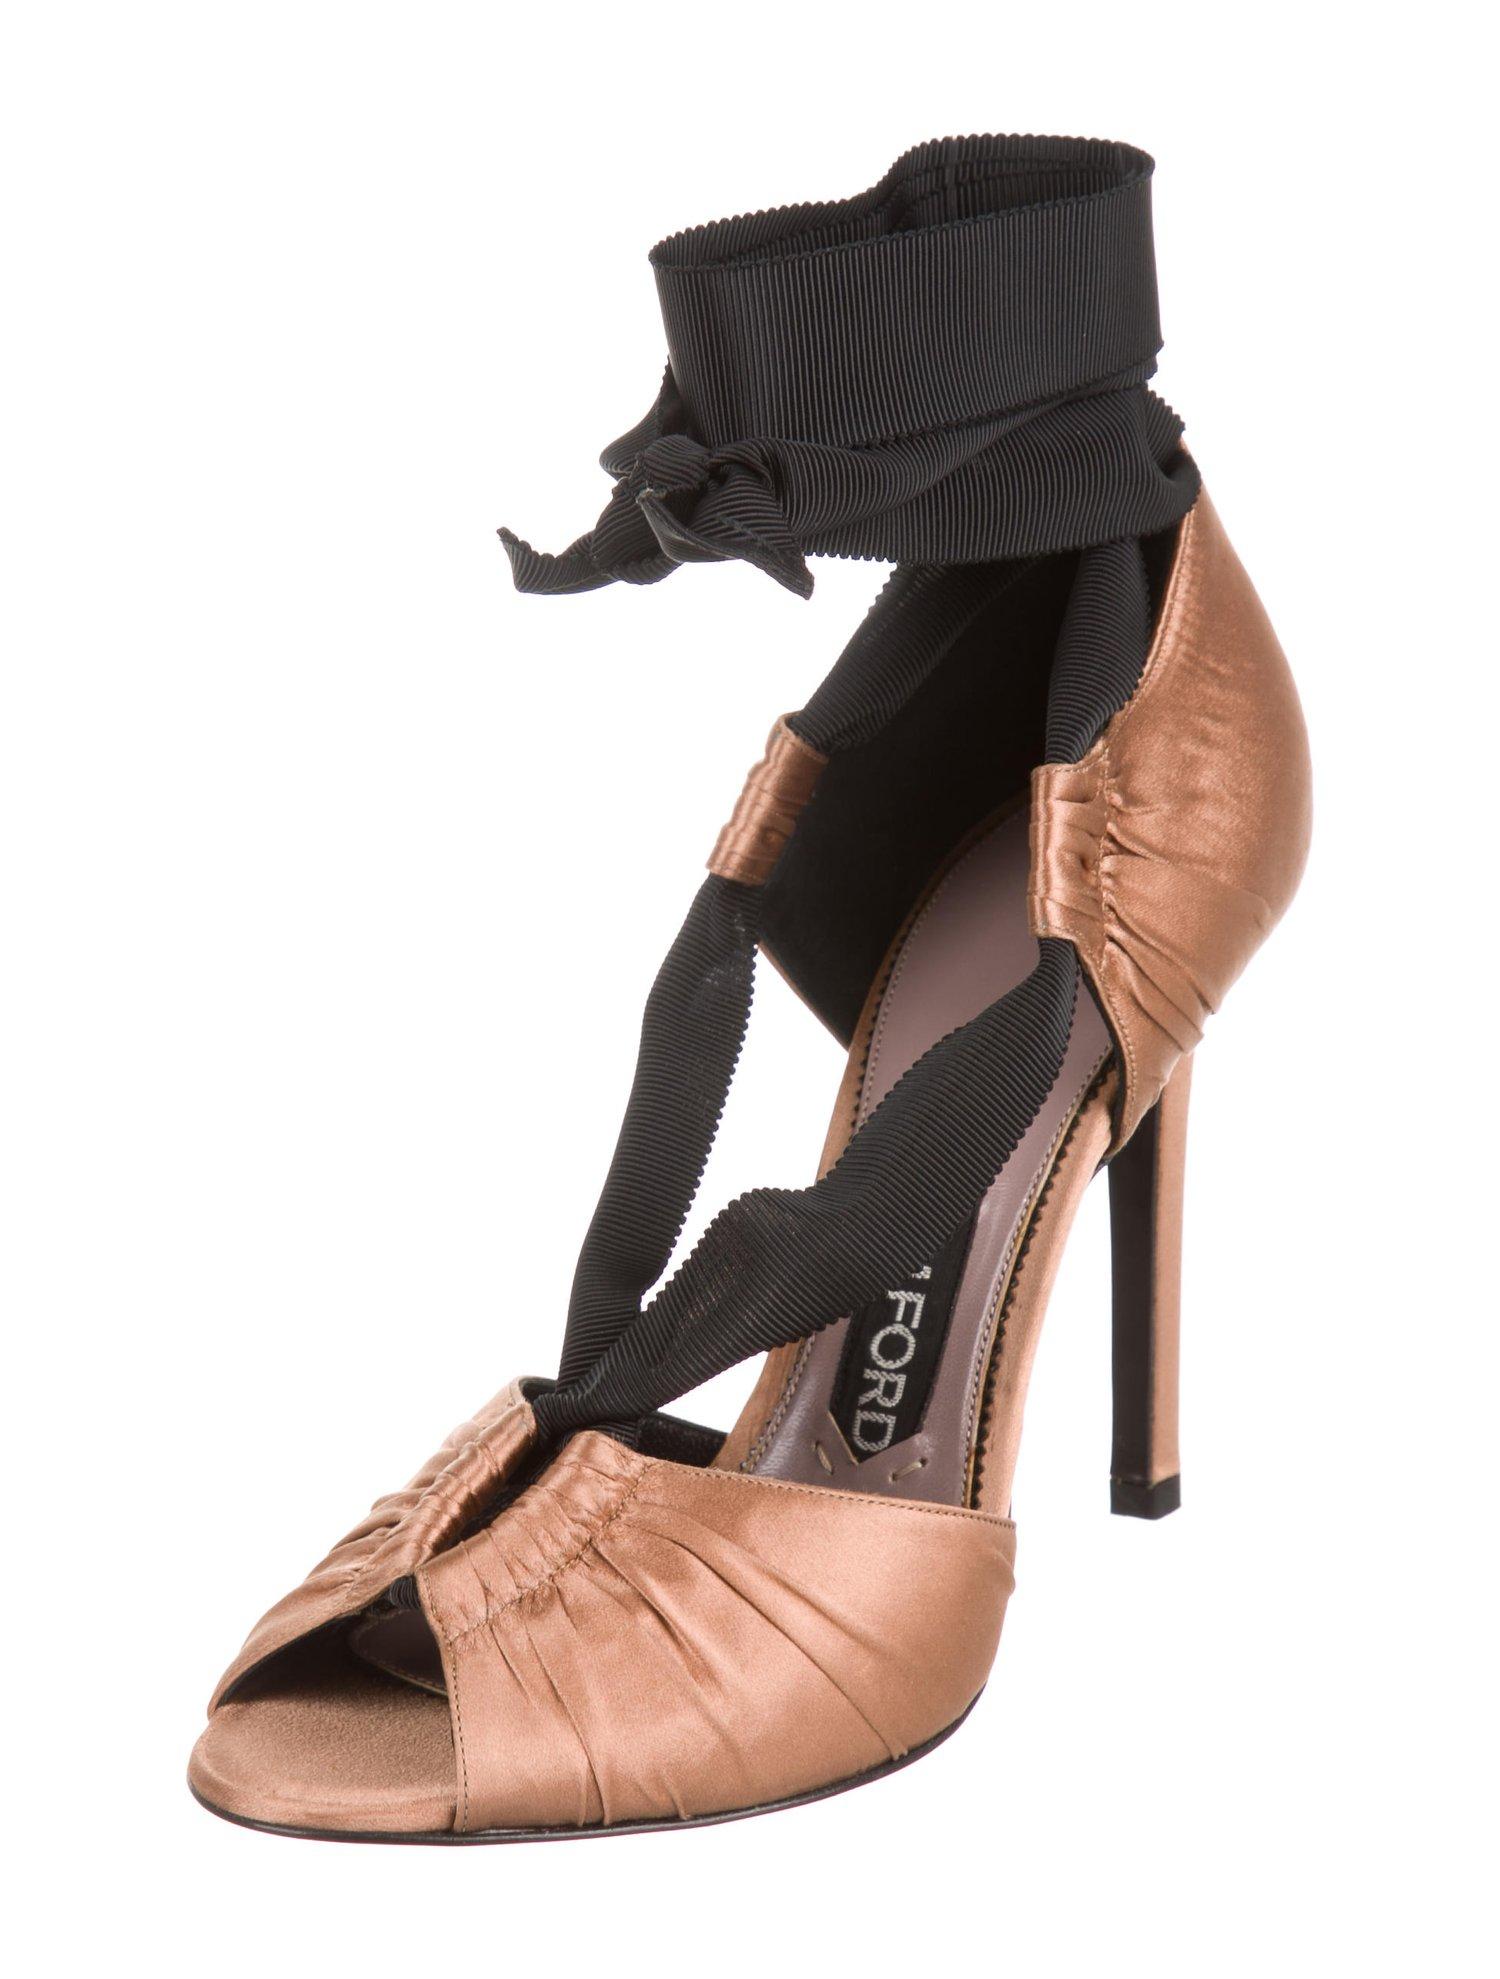 Tom Ford NEW Cognac Satin Black Tie Evening Sandals Heels in Box

Size IT 36
Satin 
Grosgrain 
Lace-up closure
Made in Italy
Heels height 4